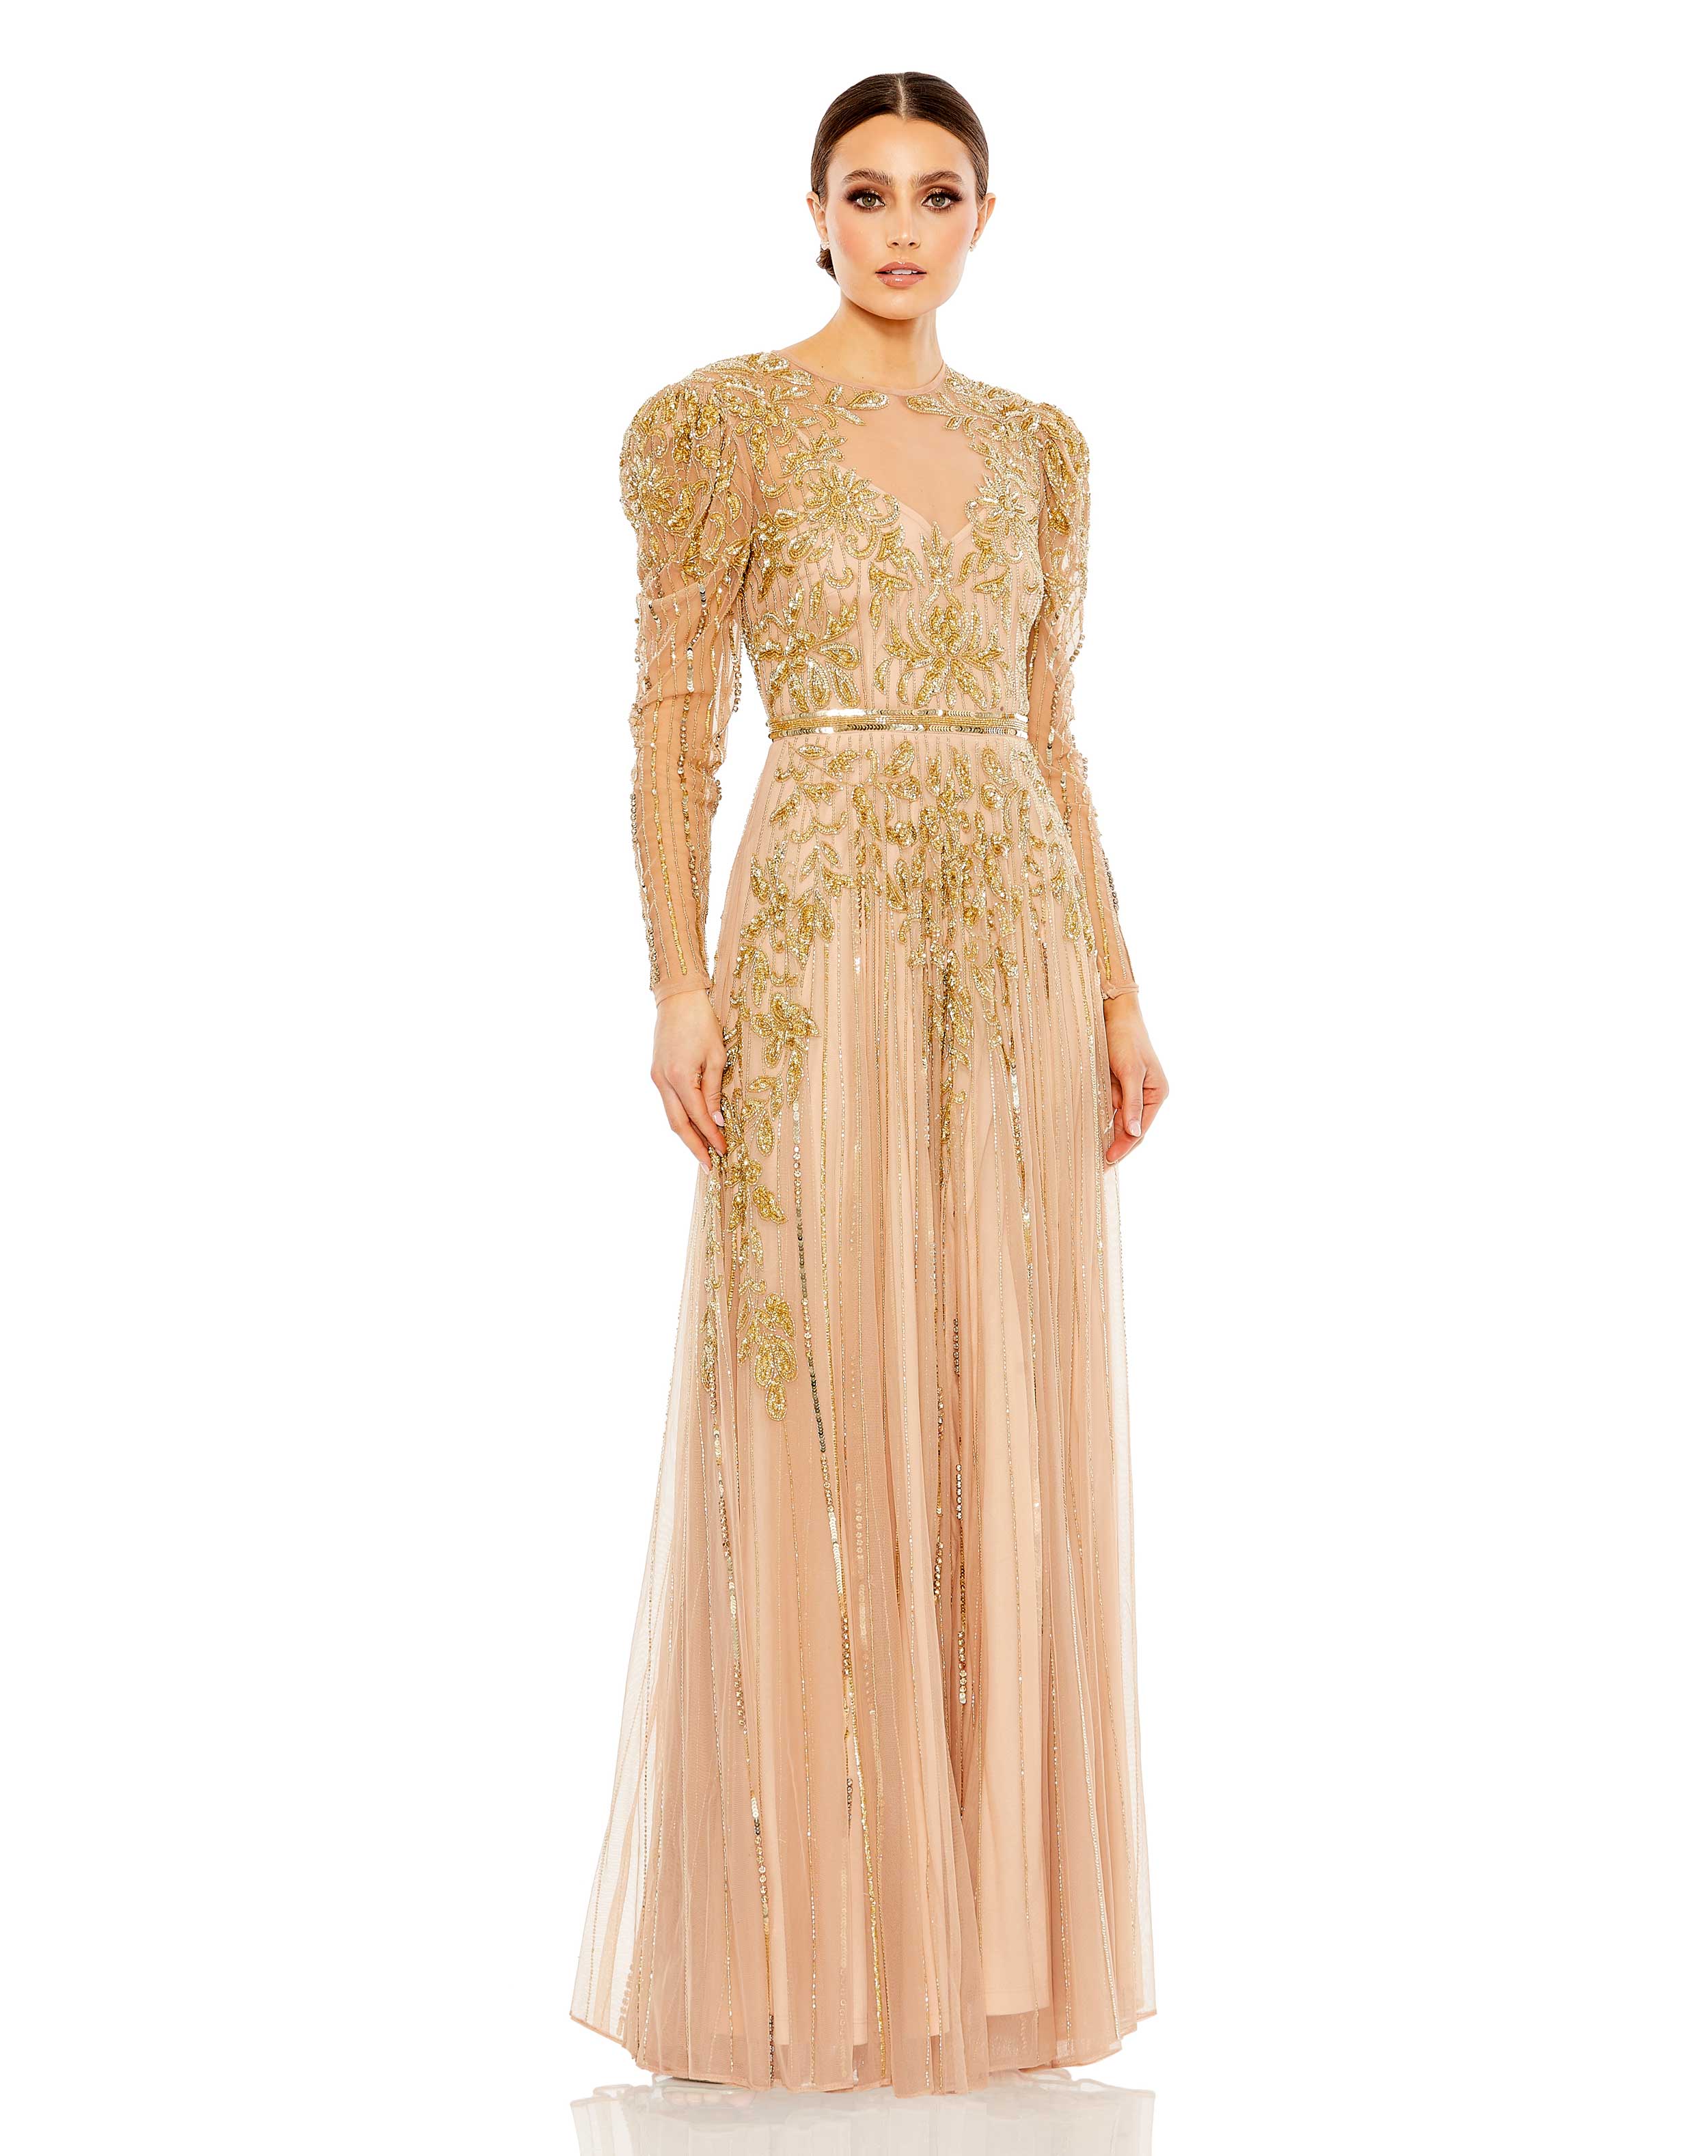 Beaded Illusion Puff Sleeve Gown